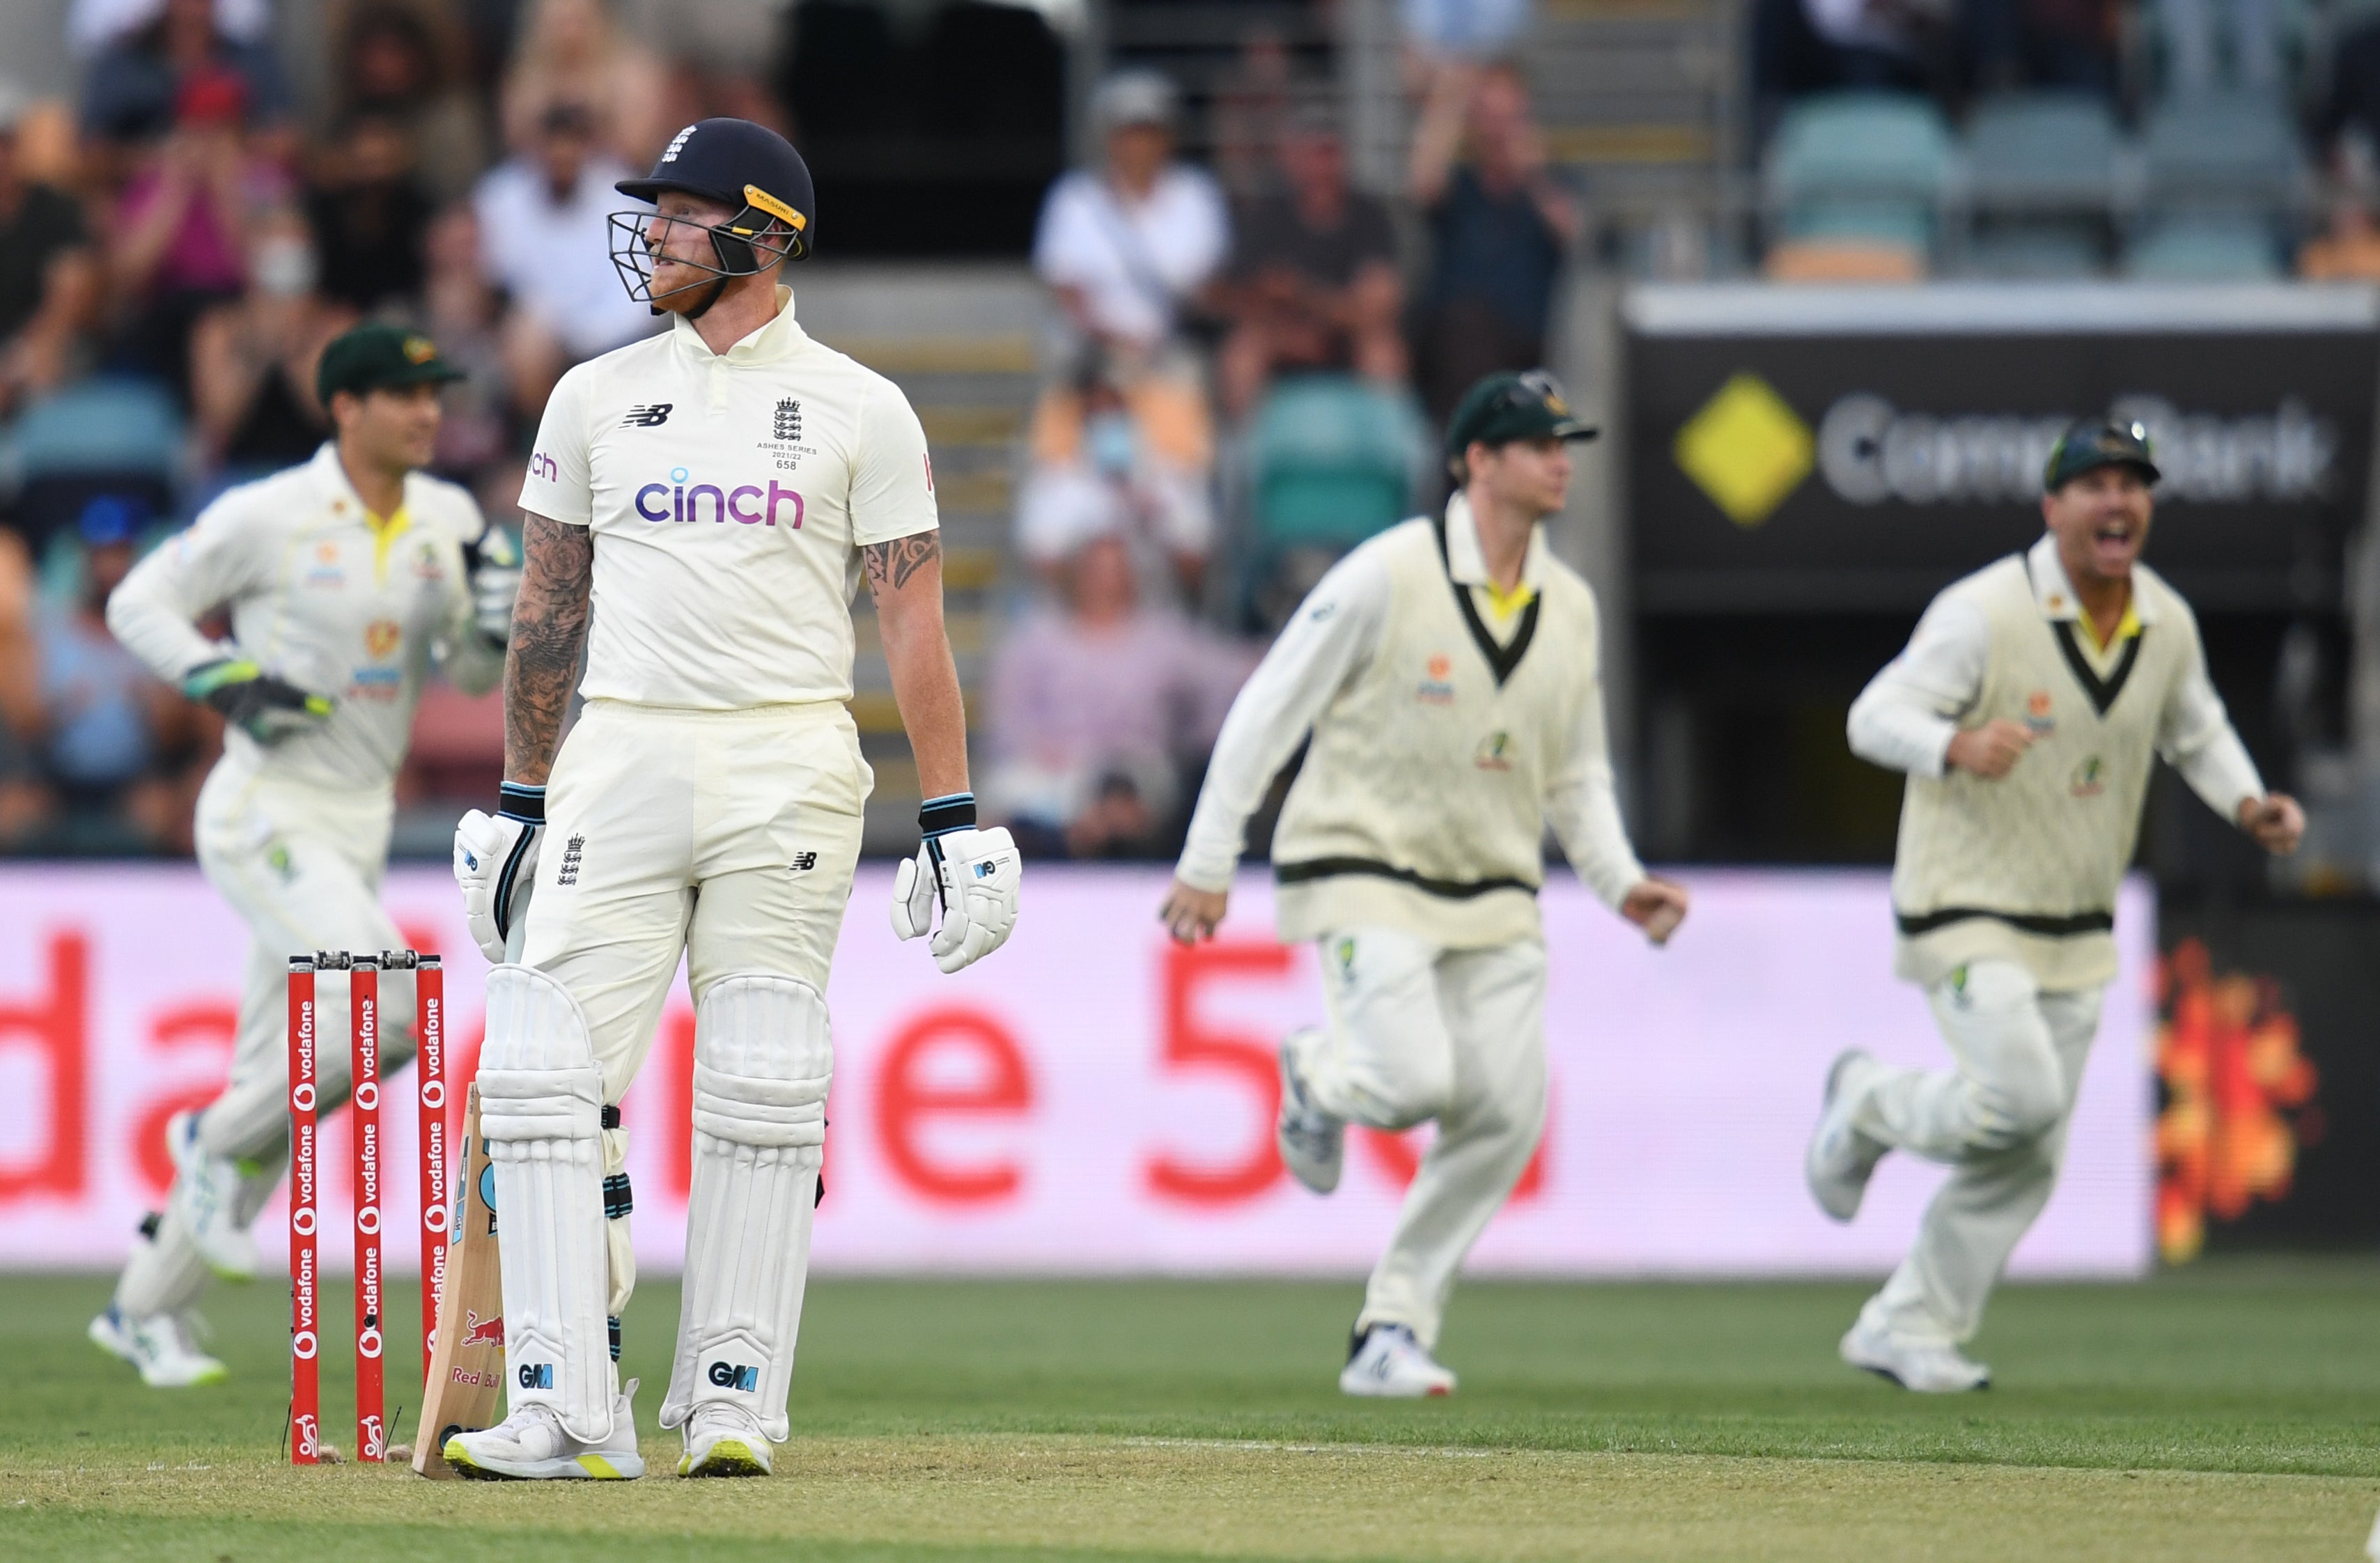 England’s Ben Stokes reacts after losing his wicket off the bowling of Australia’s Mitchell Starc (Darren England via AAP/PA)